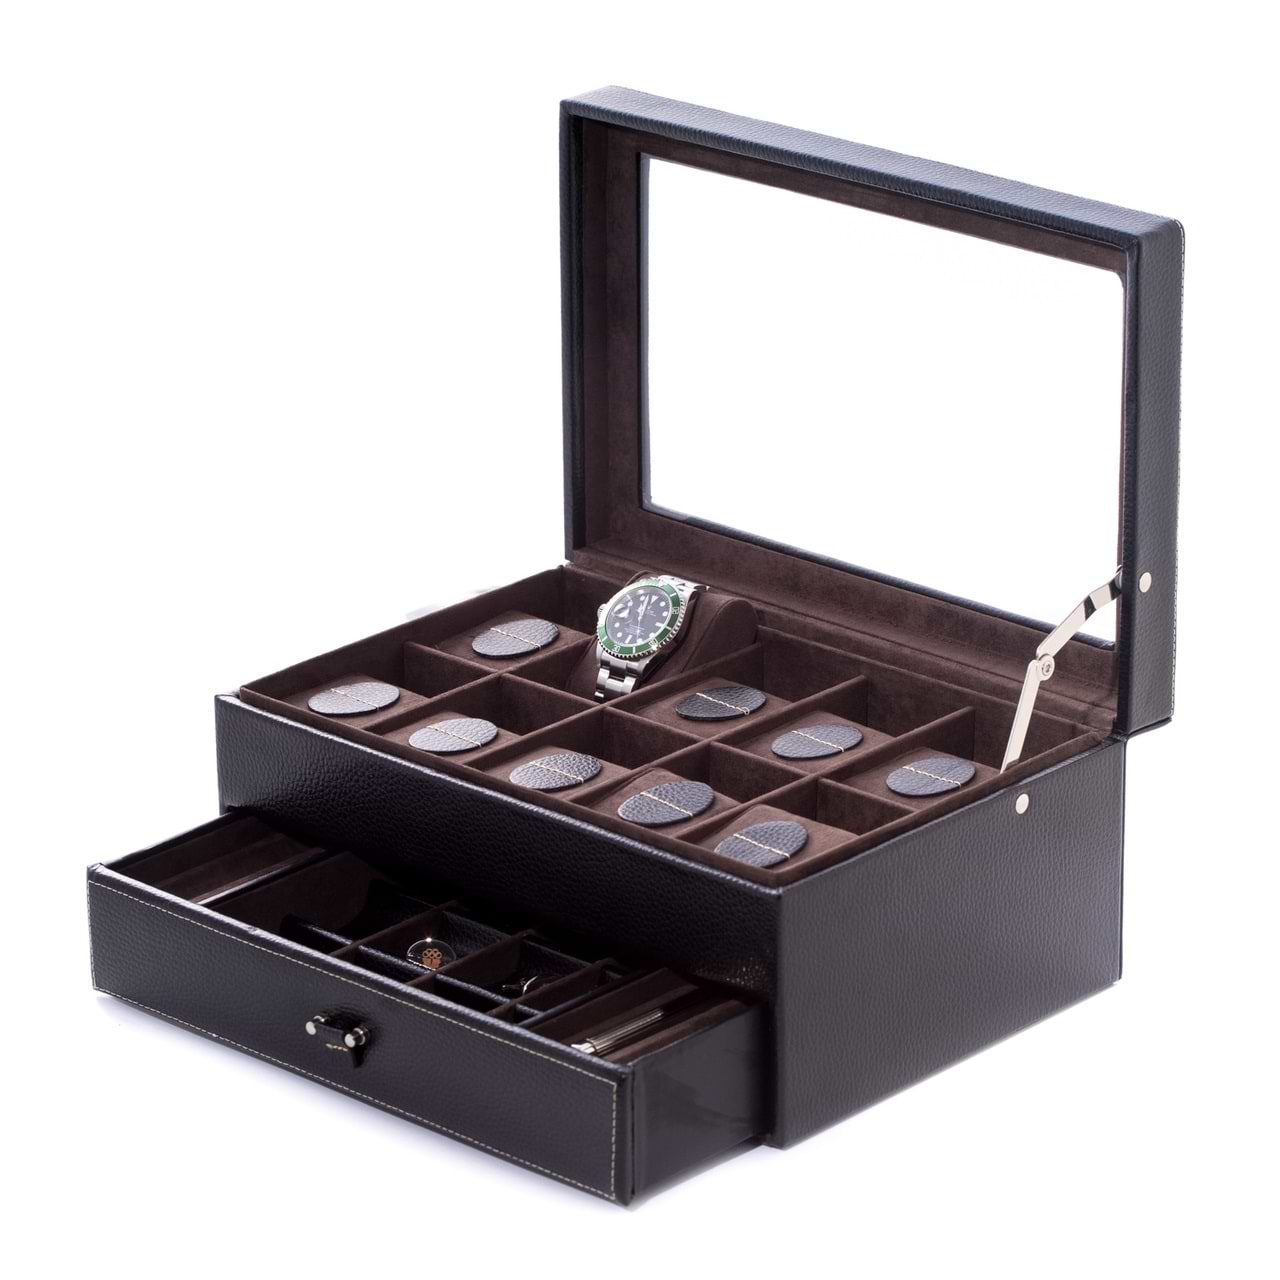 Black Leather 10 Watch Case w/ Glass Top, Drawer for Cufflinks & Pens